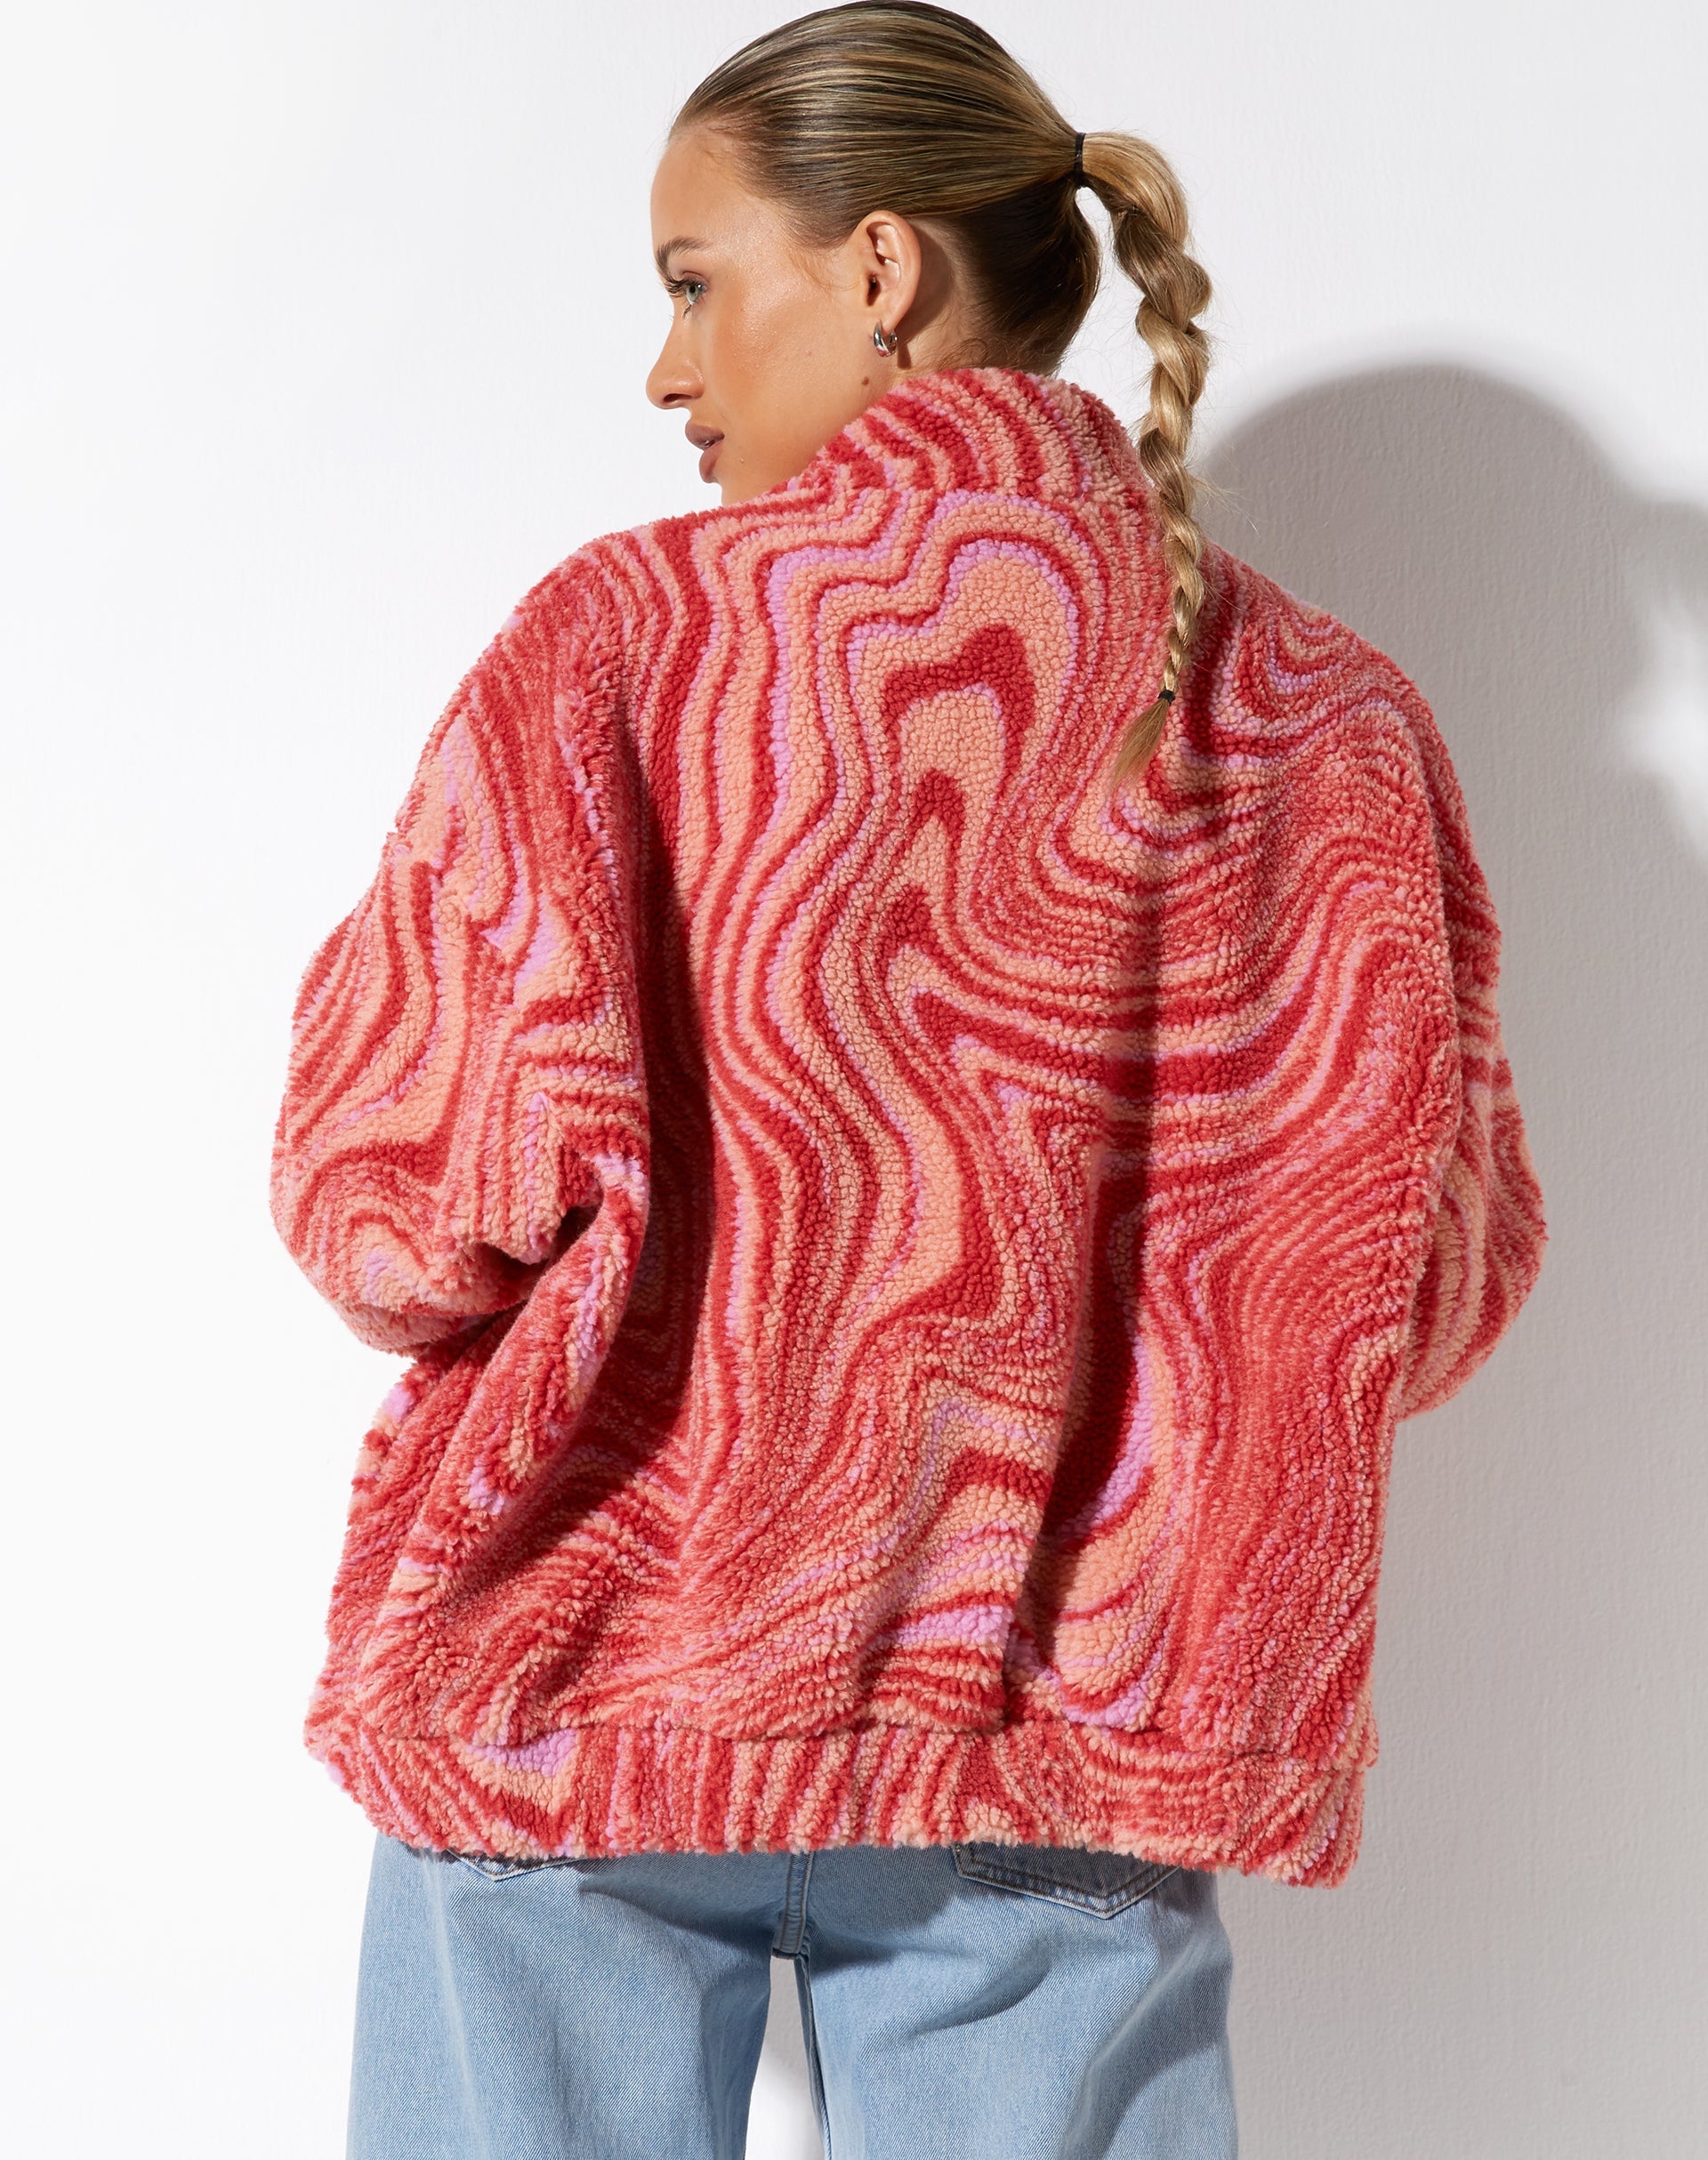 image of Nereo Jacket in Ripple Pink